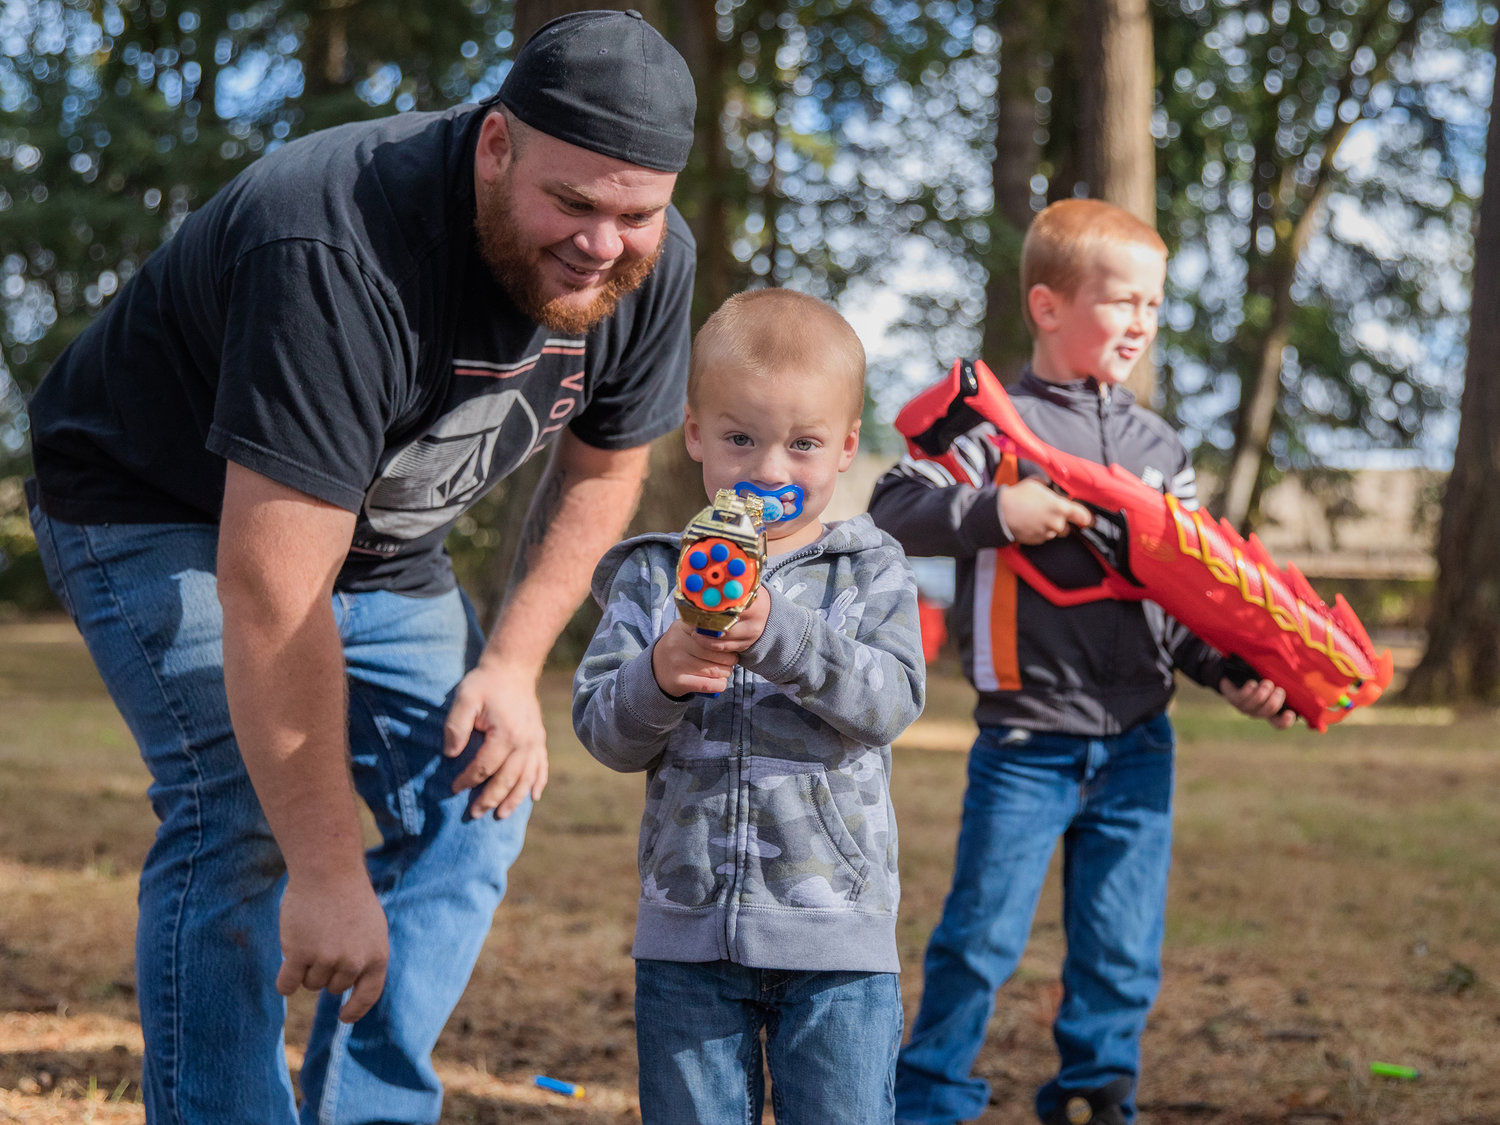 Andy Sickles smiles as Luke, 2, aims his six-shooter alongside his brother Abram, 6, during a Nerf War Sunday afternoon at Borst Park.